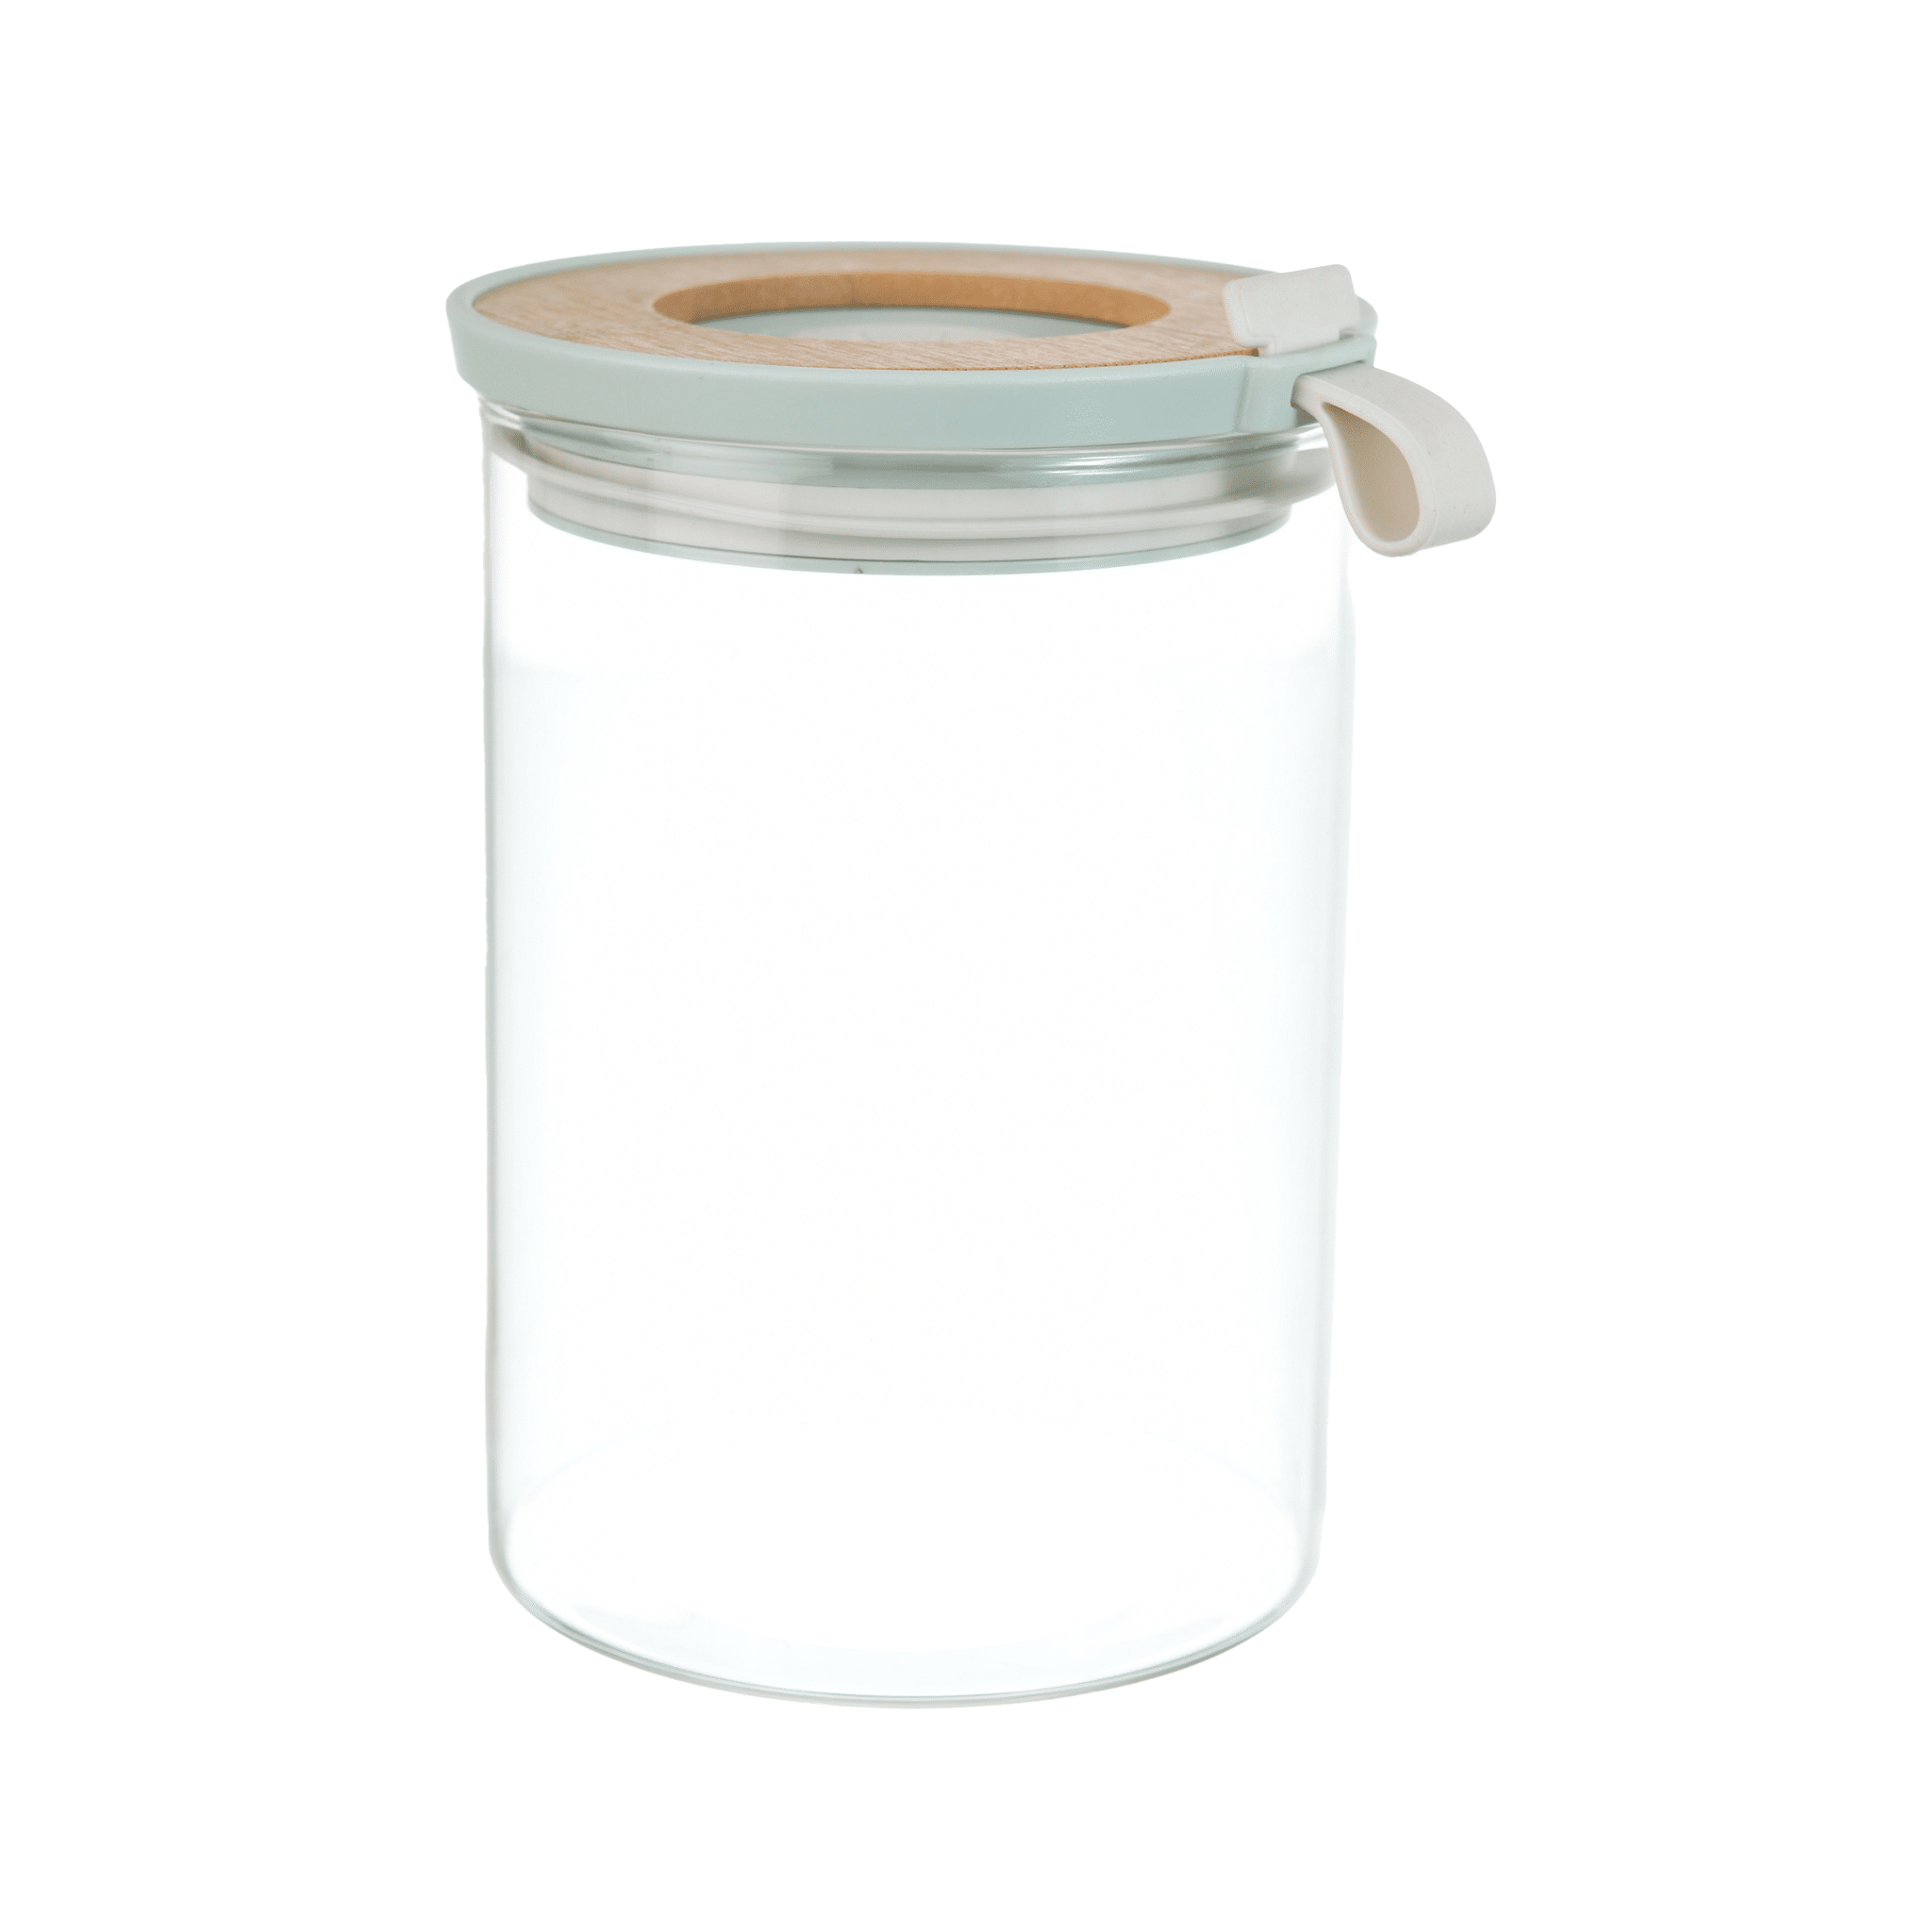 O'lala - Glass Jar with Bamboo Cover - White - 10x14cm - 520008120